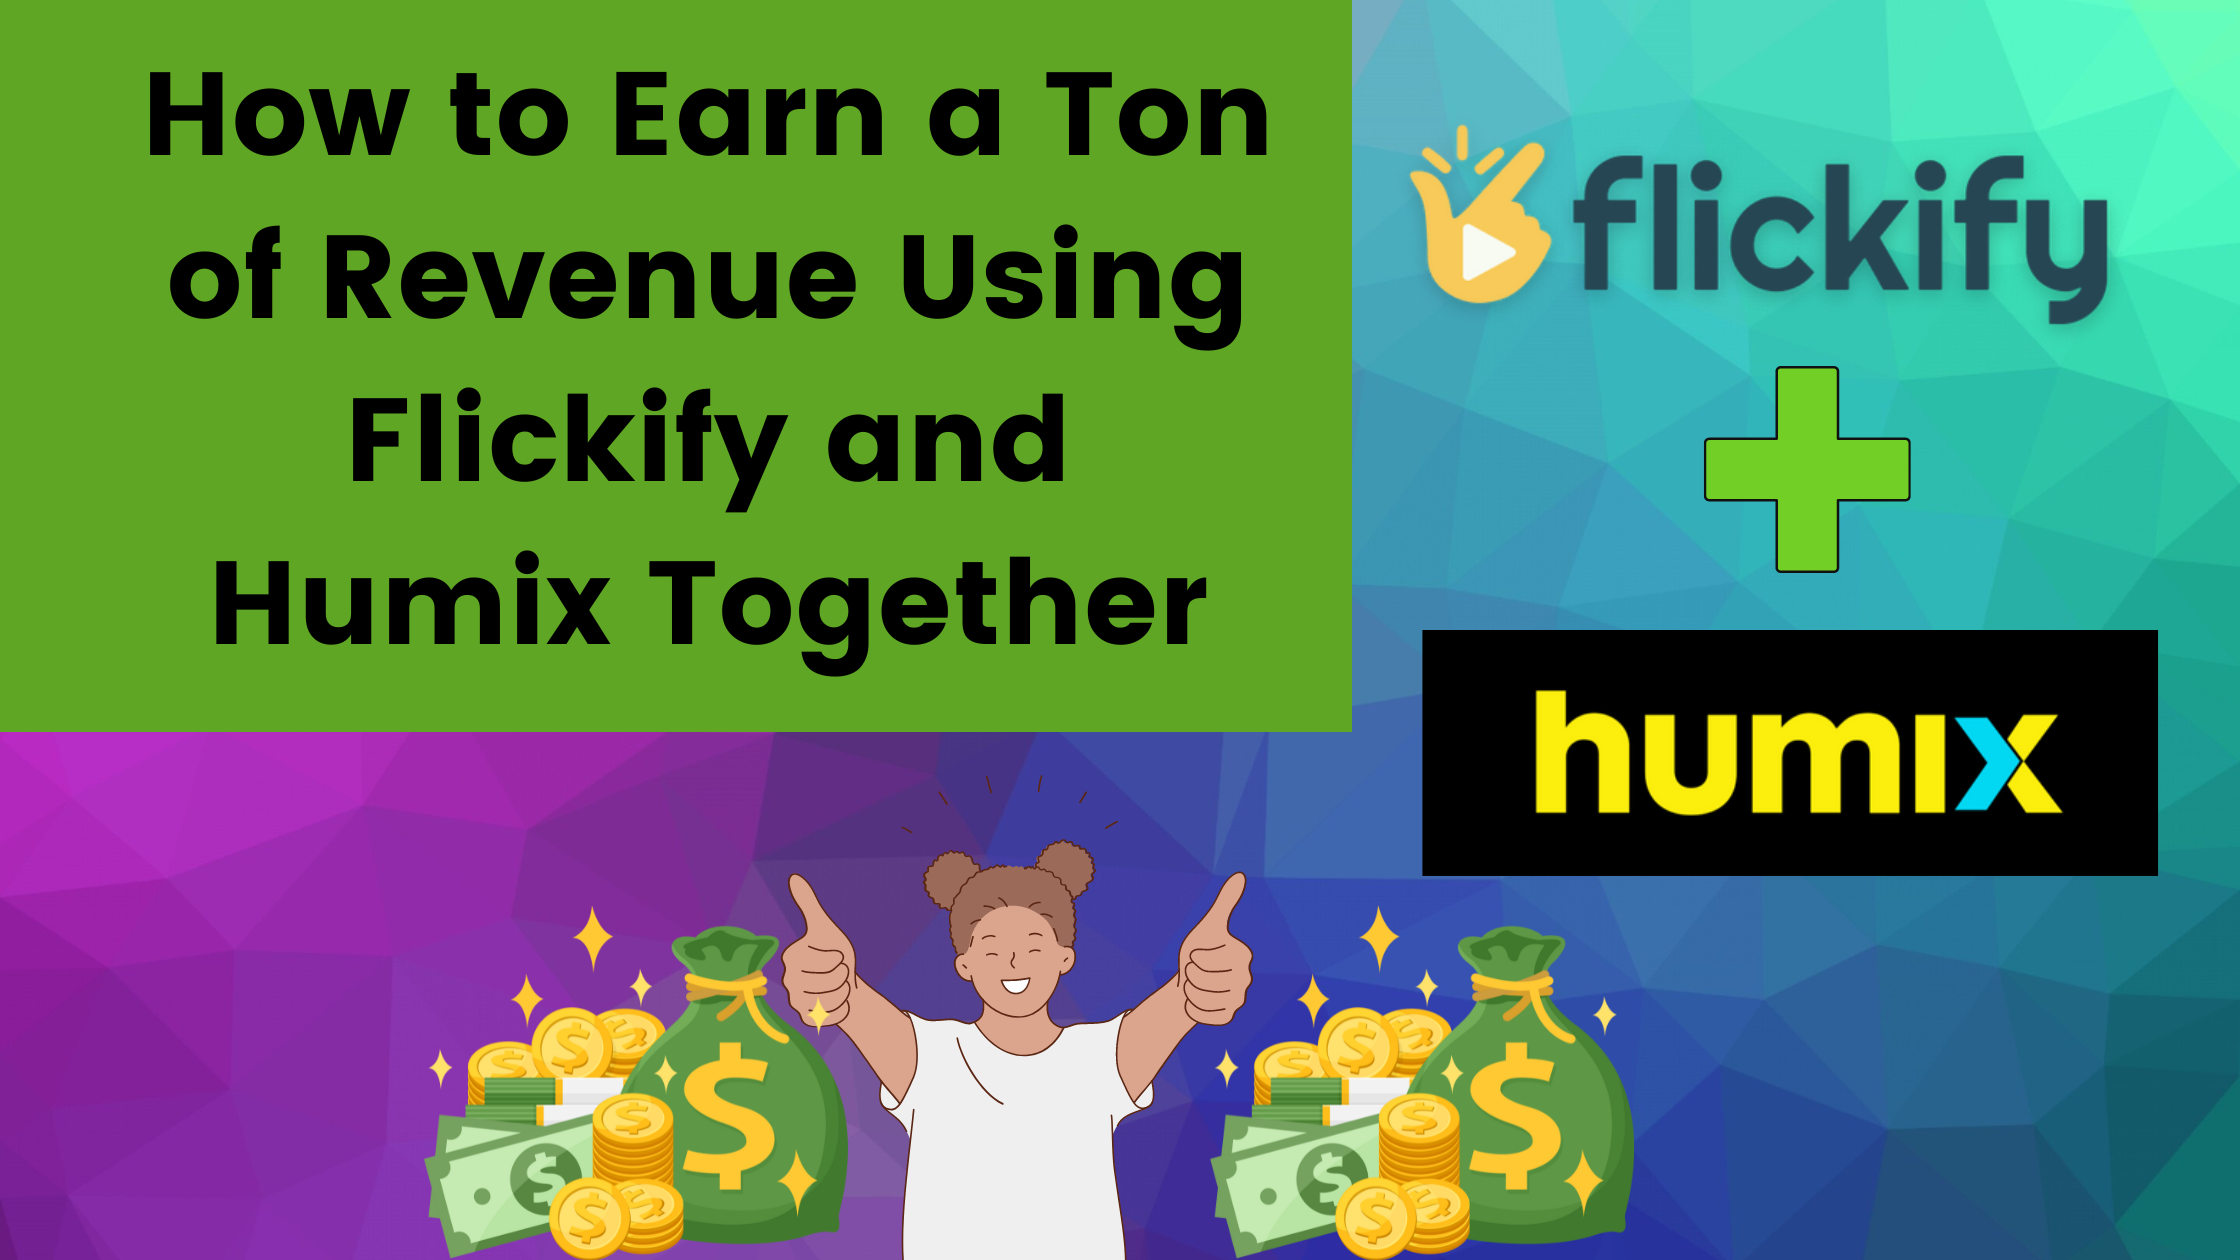 How to Earn a Ton of Revenue Using Flickify and Humix Together